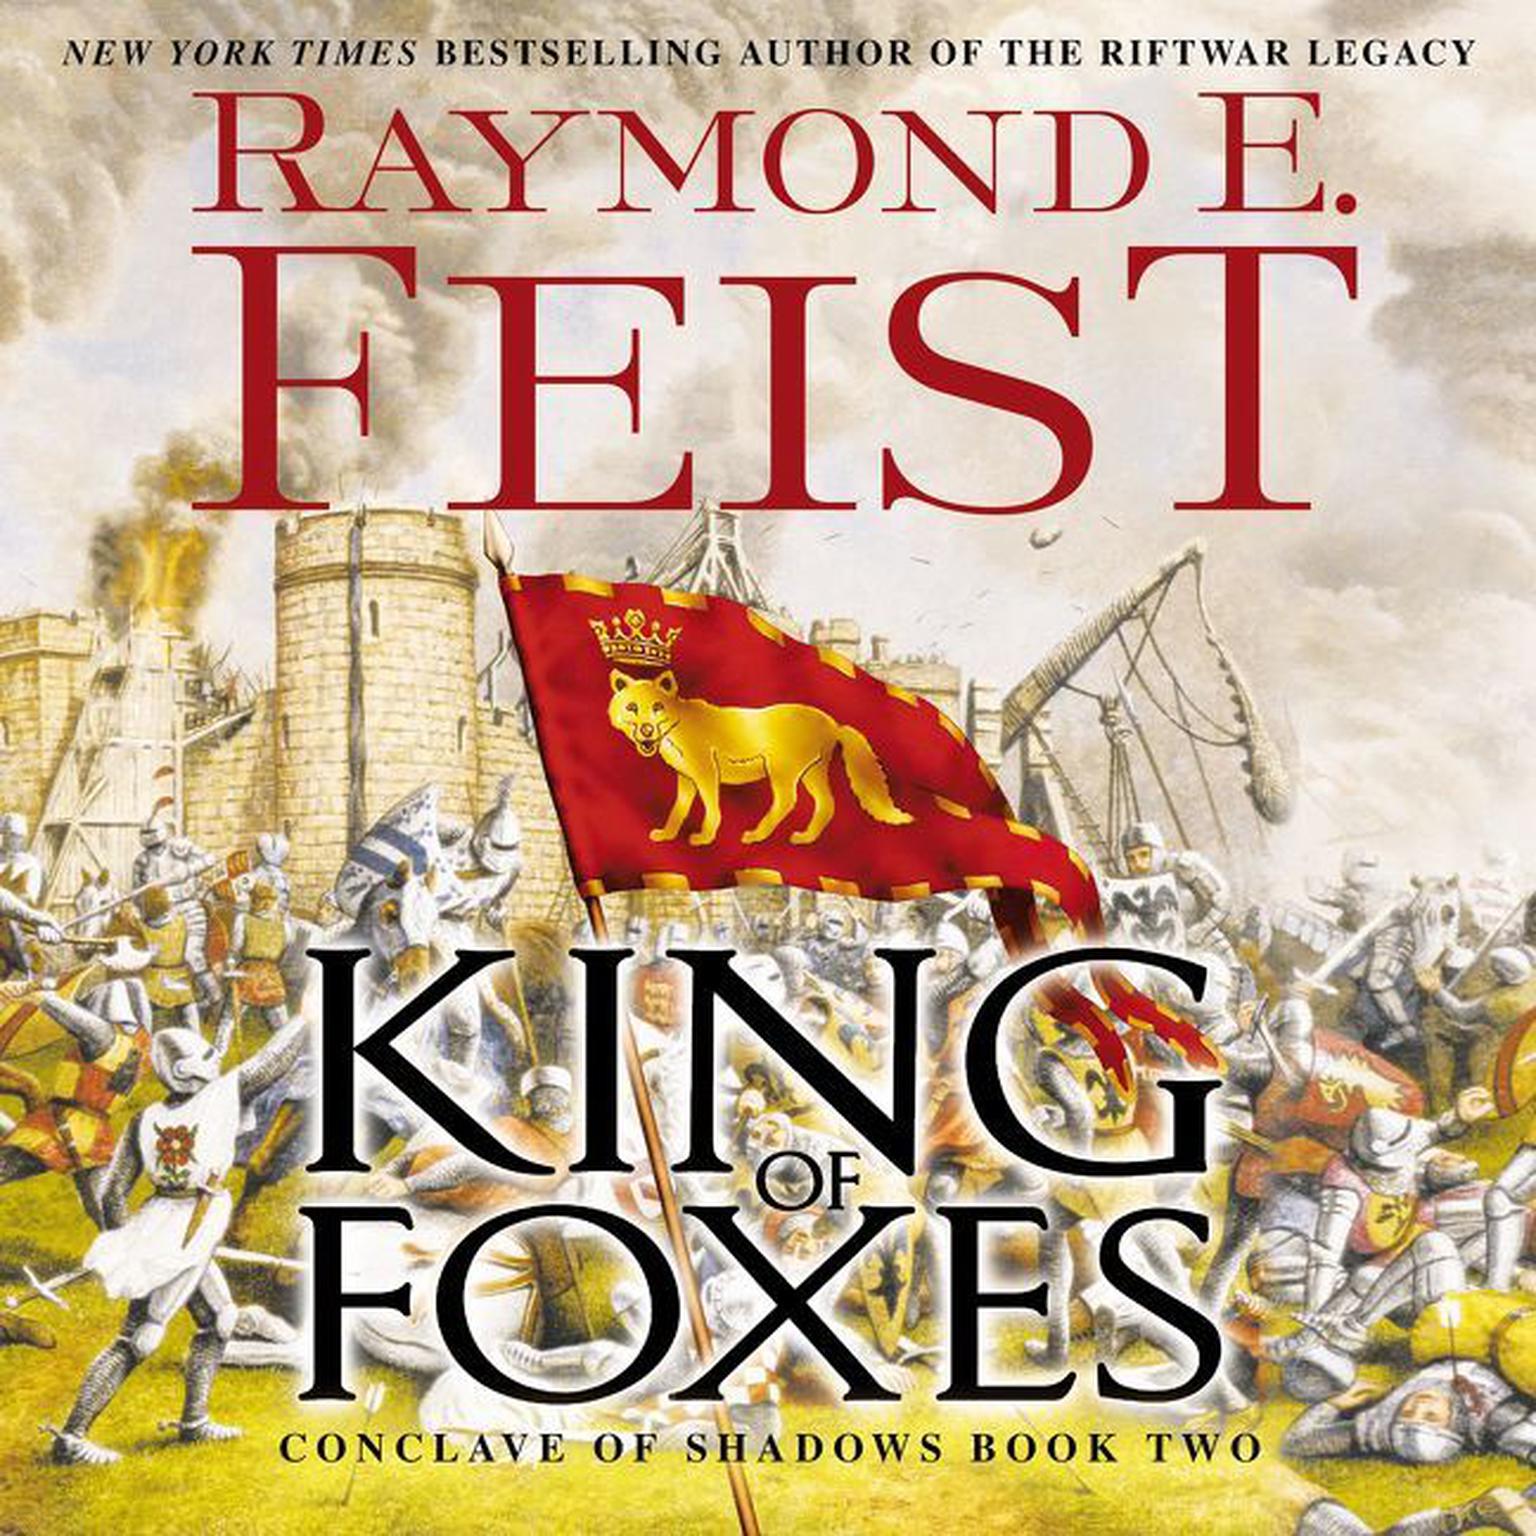 King of Foxes: Conclave of Shadows: Book Two Audiobook, by Raymond E. Feist